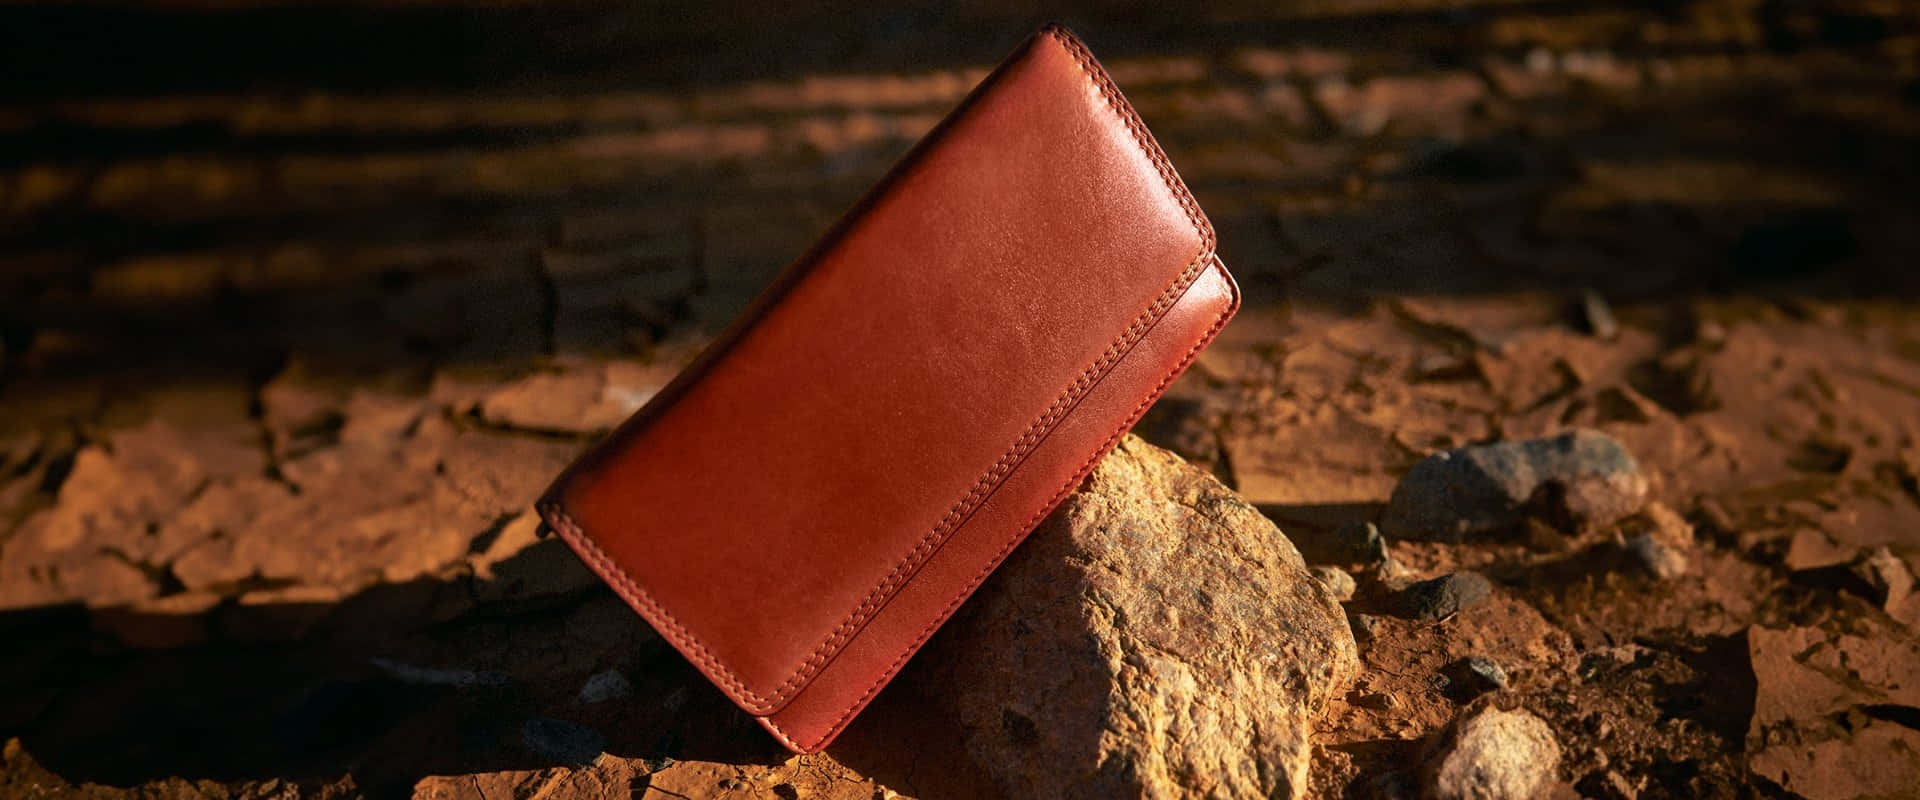 Rustic Leather Wallet Outdoor Setting Wallpaper